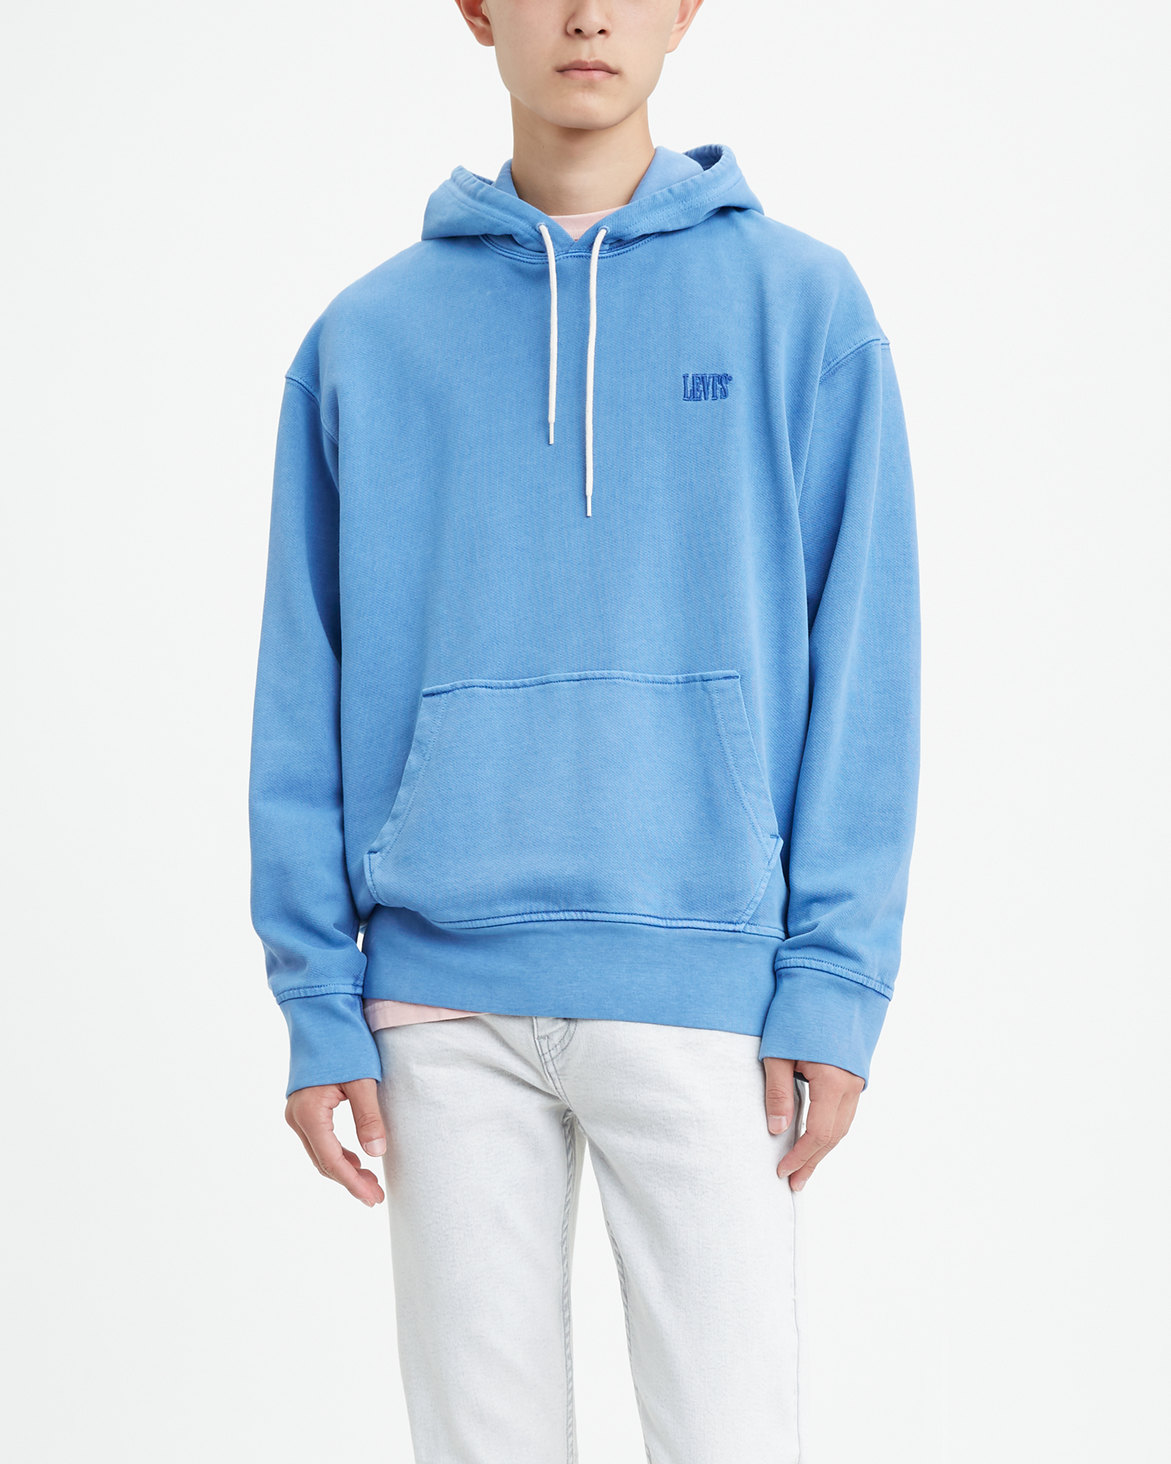 Authentic Pullover Hoodie | Levi